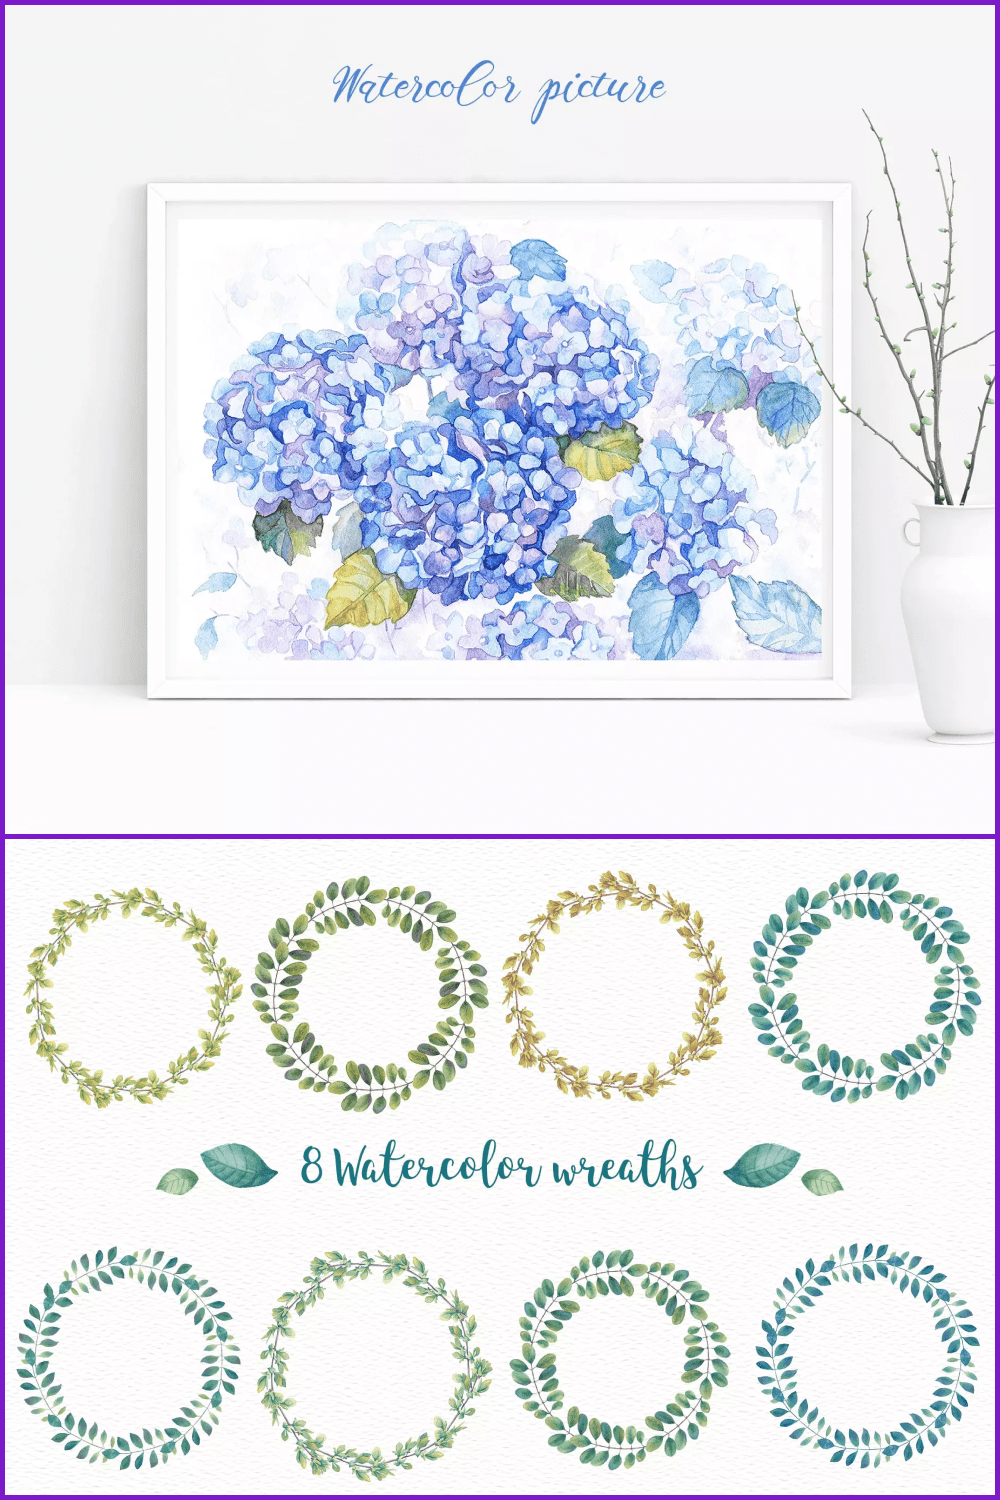 Painting with blue Hydrangea in the watercolor technique.